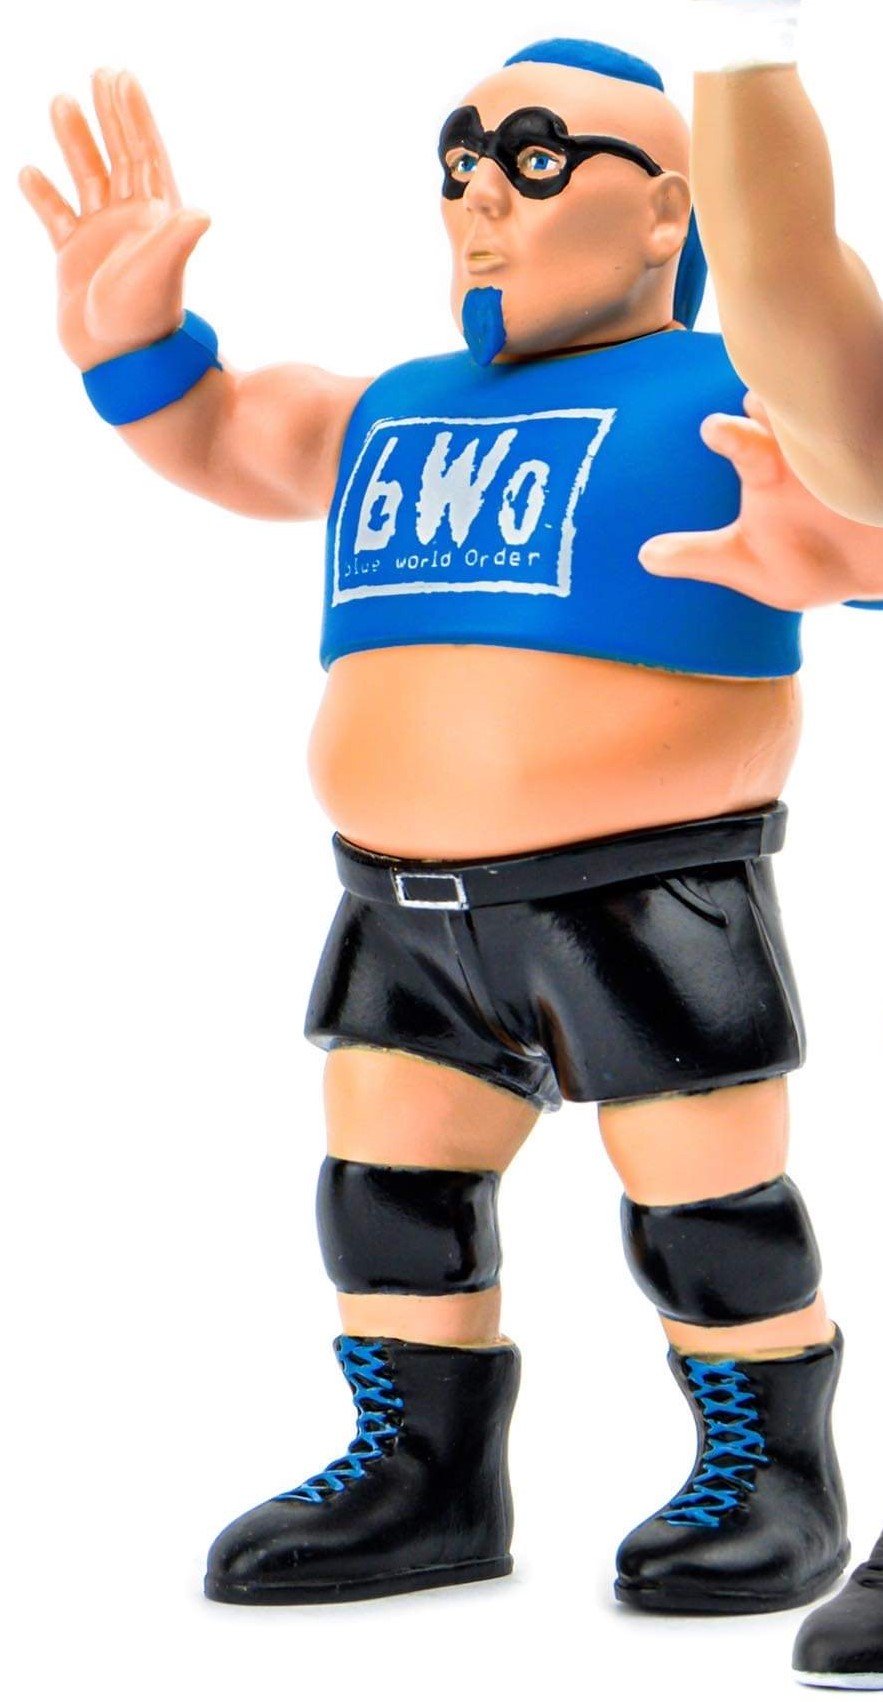 Image of BLUE MEANIE wrestling megastars series 2 figure by Chella Toys